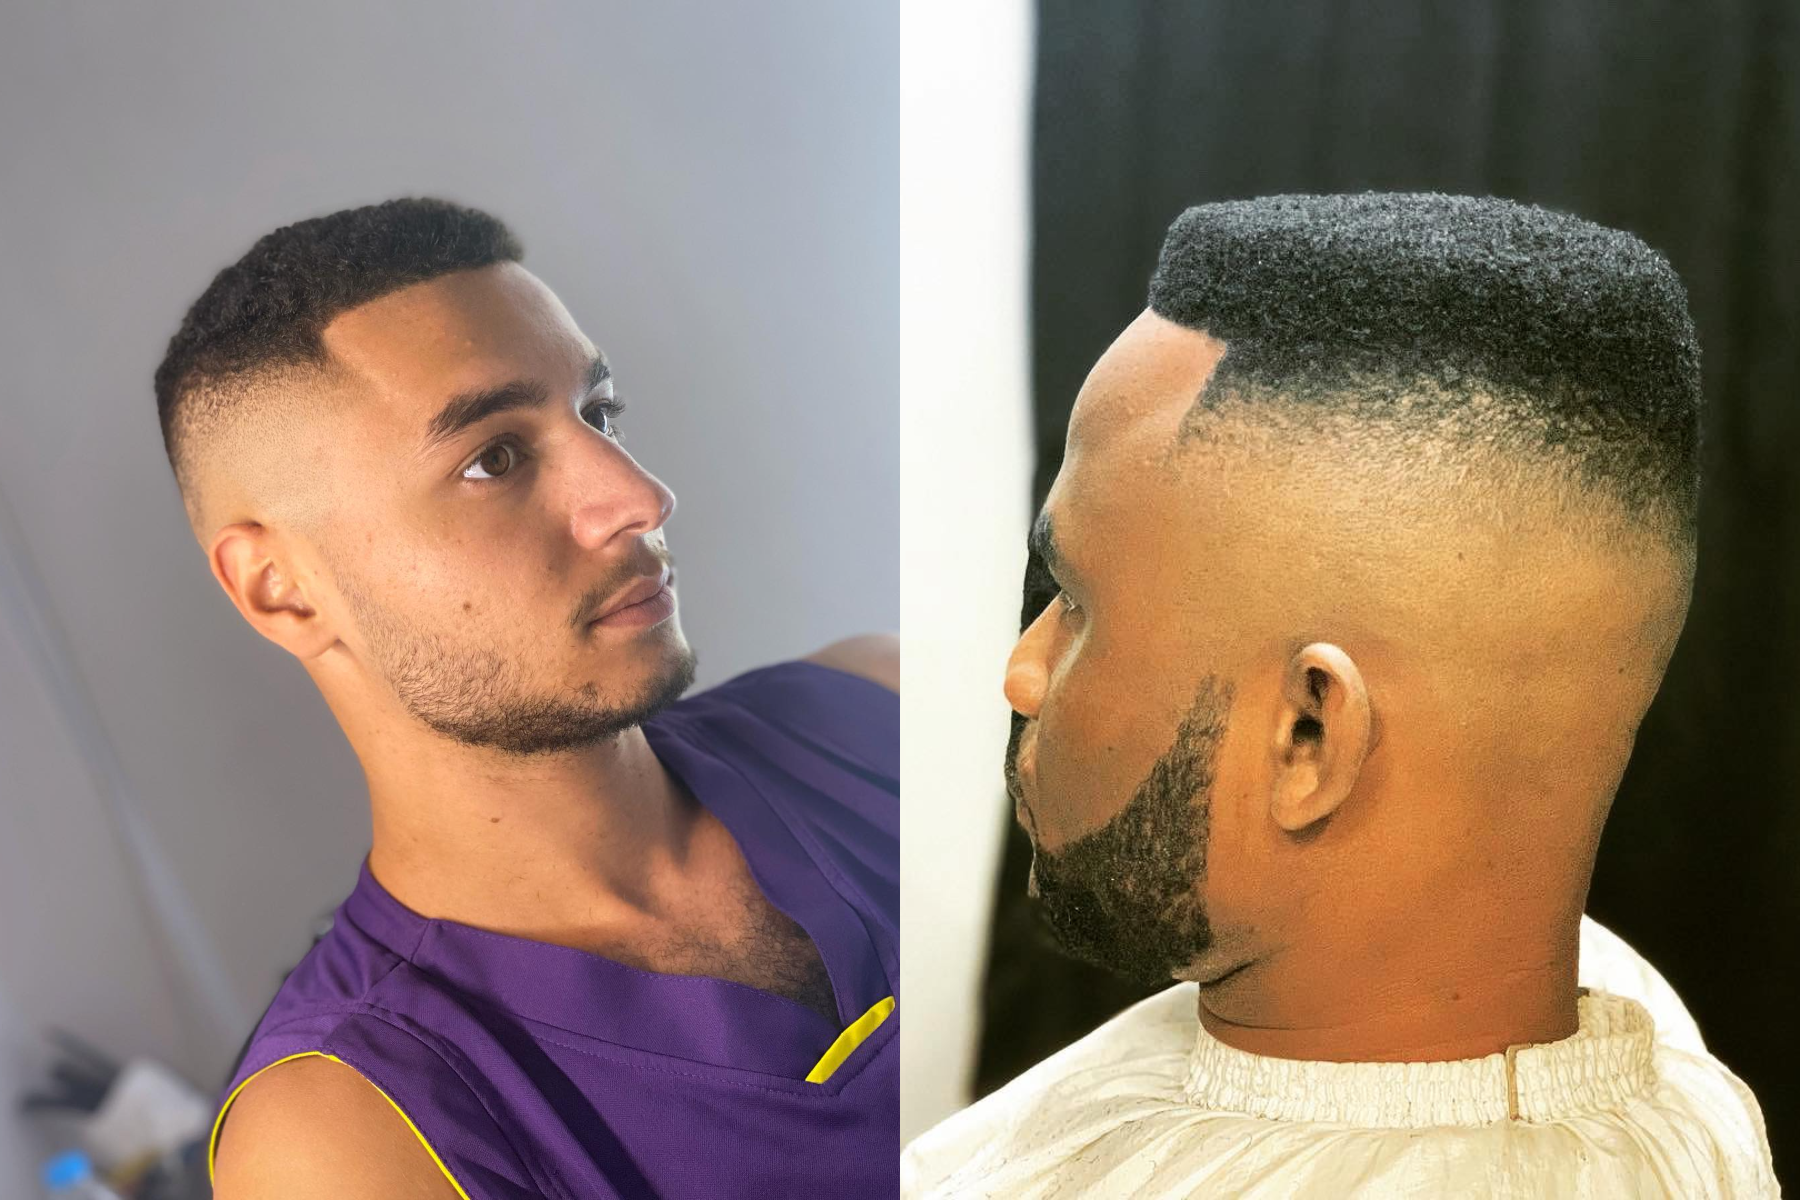 25 Men's Haircuts That Are Perfect for Square Faces